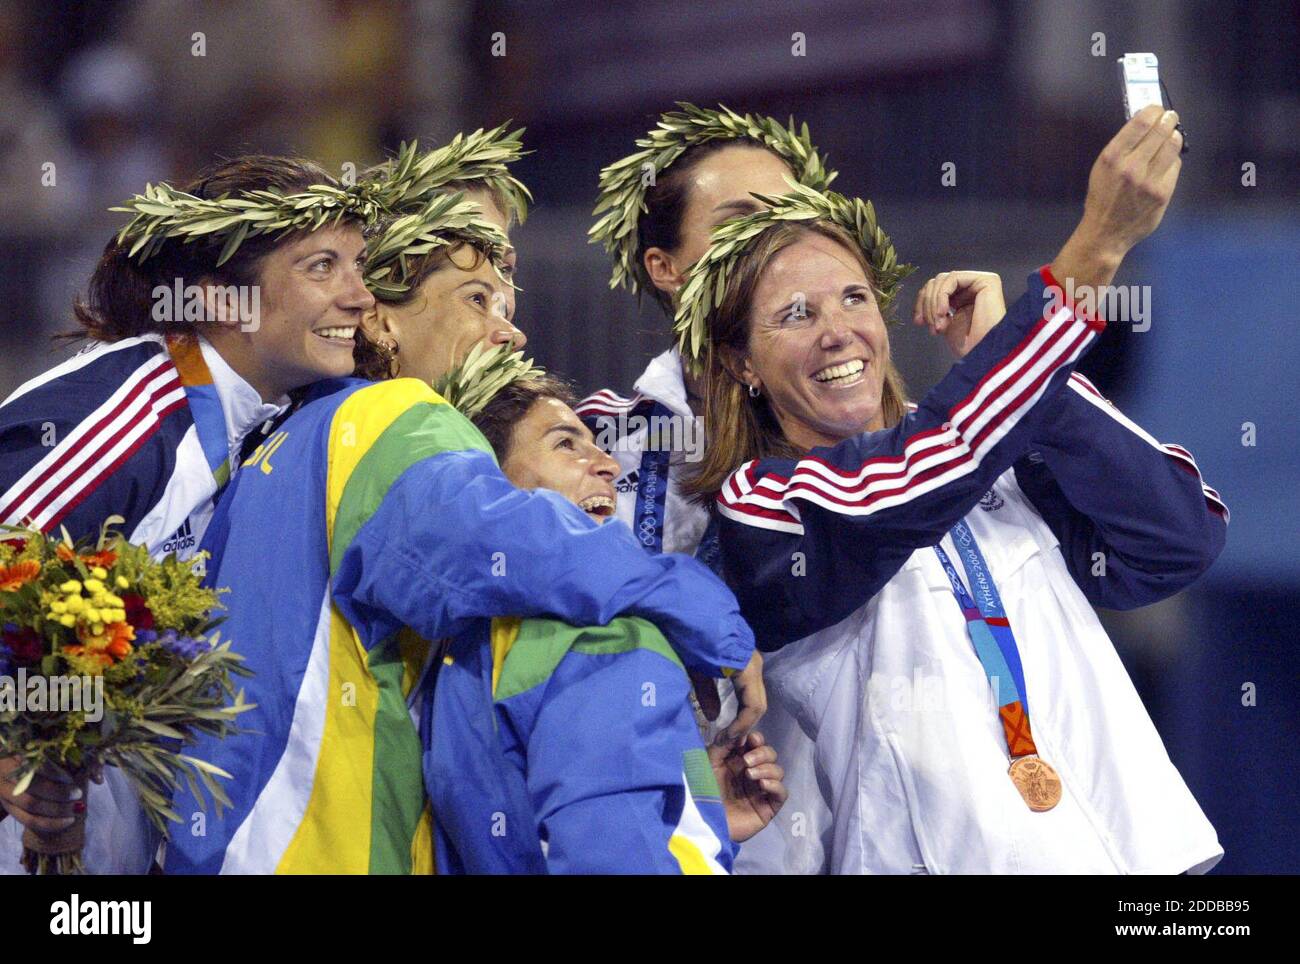 NO FILM, NO VIDEO, NO TV, NO DOCUMENTARY - Bronze medalist Elaine Youngs, right, of the United States takes a group picture of the six medalists in beach volleyball in the 2004 Olympic Games on Tuesday, August 24, 2004. Photo by David Eulitt/Kansas City Star/KRT/ABACA Stock Photo